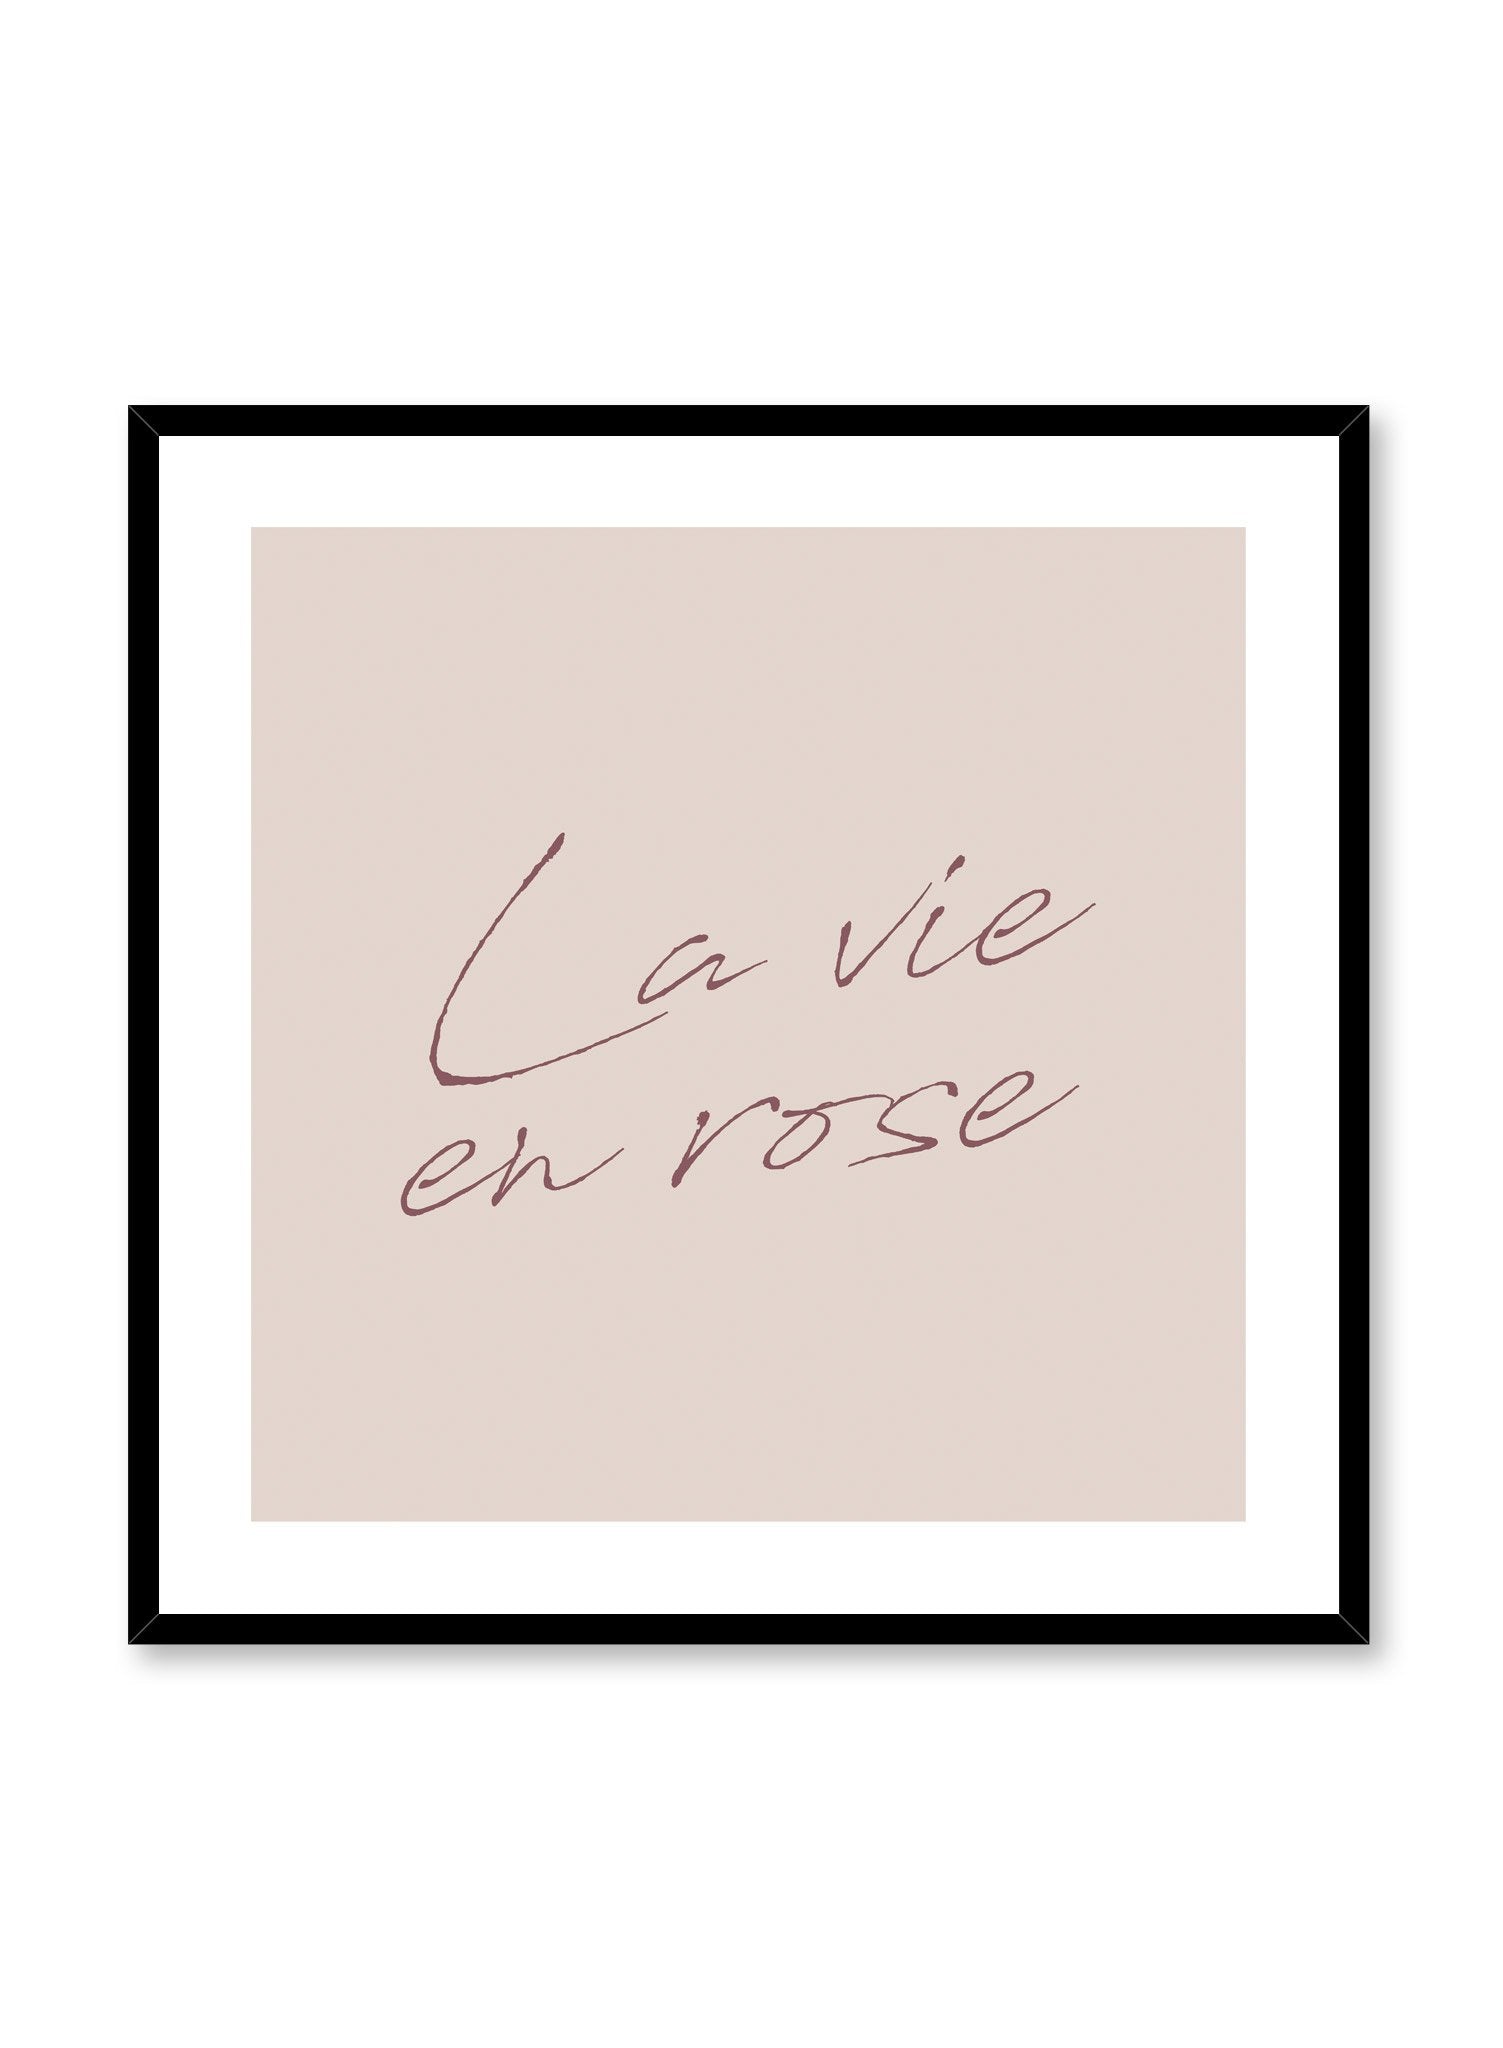 Scandinavian poster by Opposite Wall with trendy La vie en rose typography design in square format